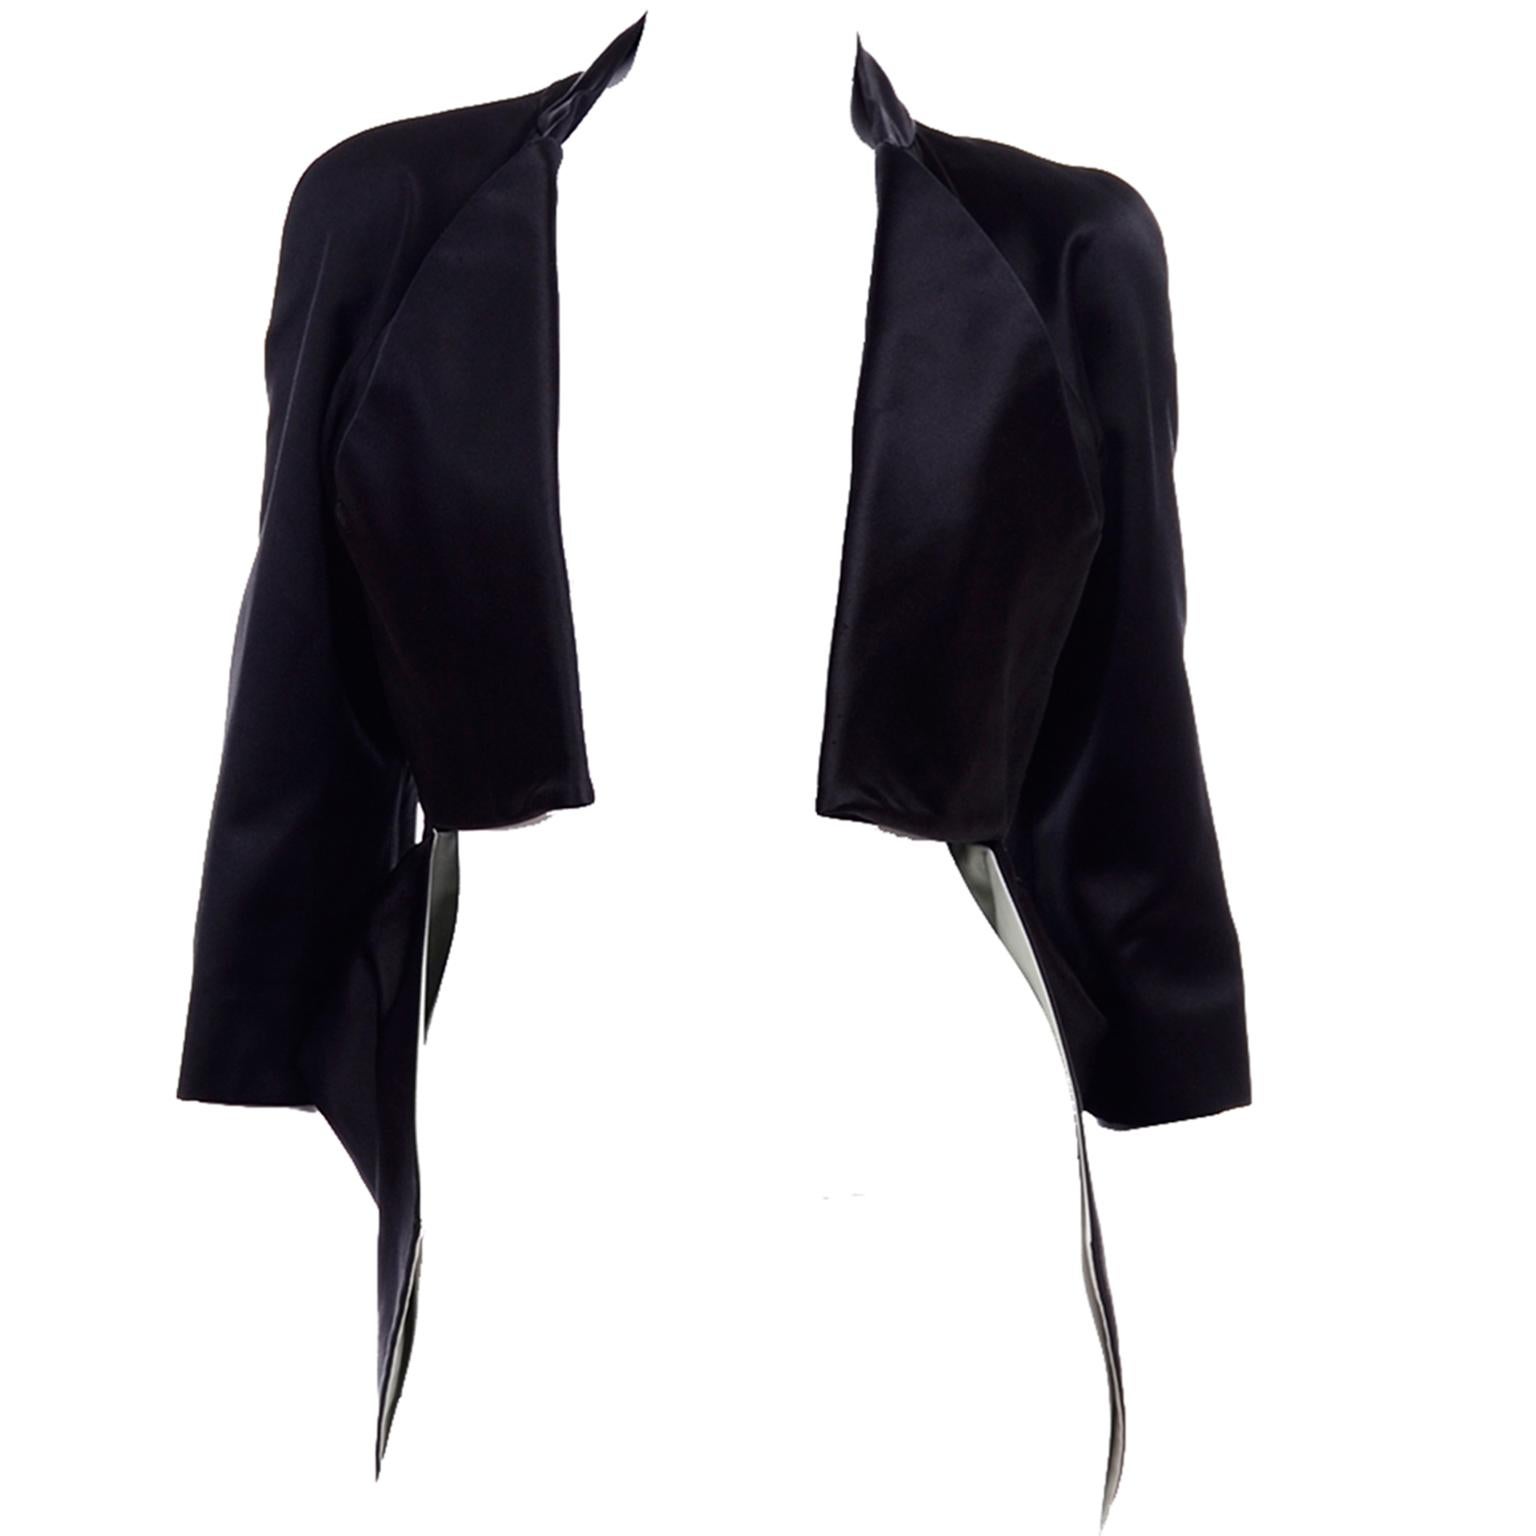 2009 Alexander McQueen Black Silk Cutaway Cropped Tuxedo Jacket With Tails 7